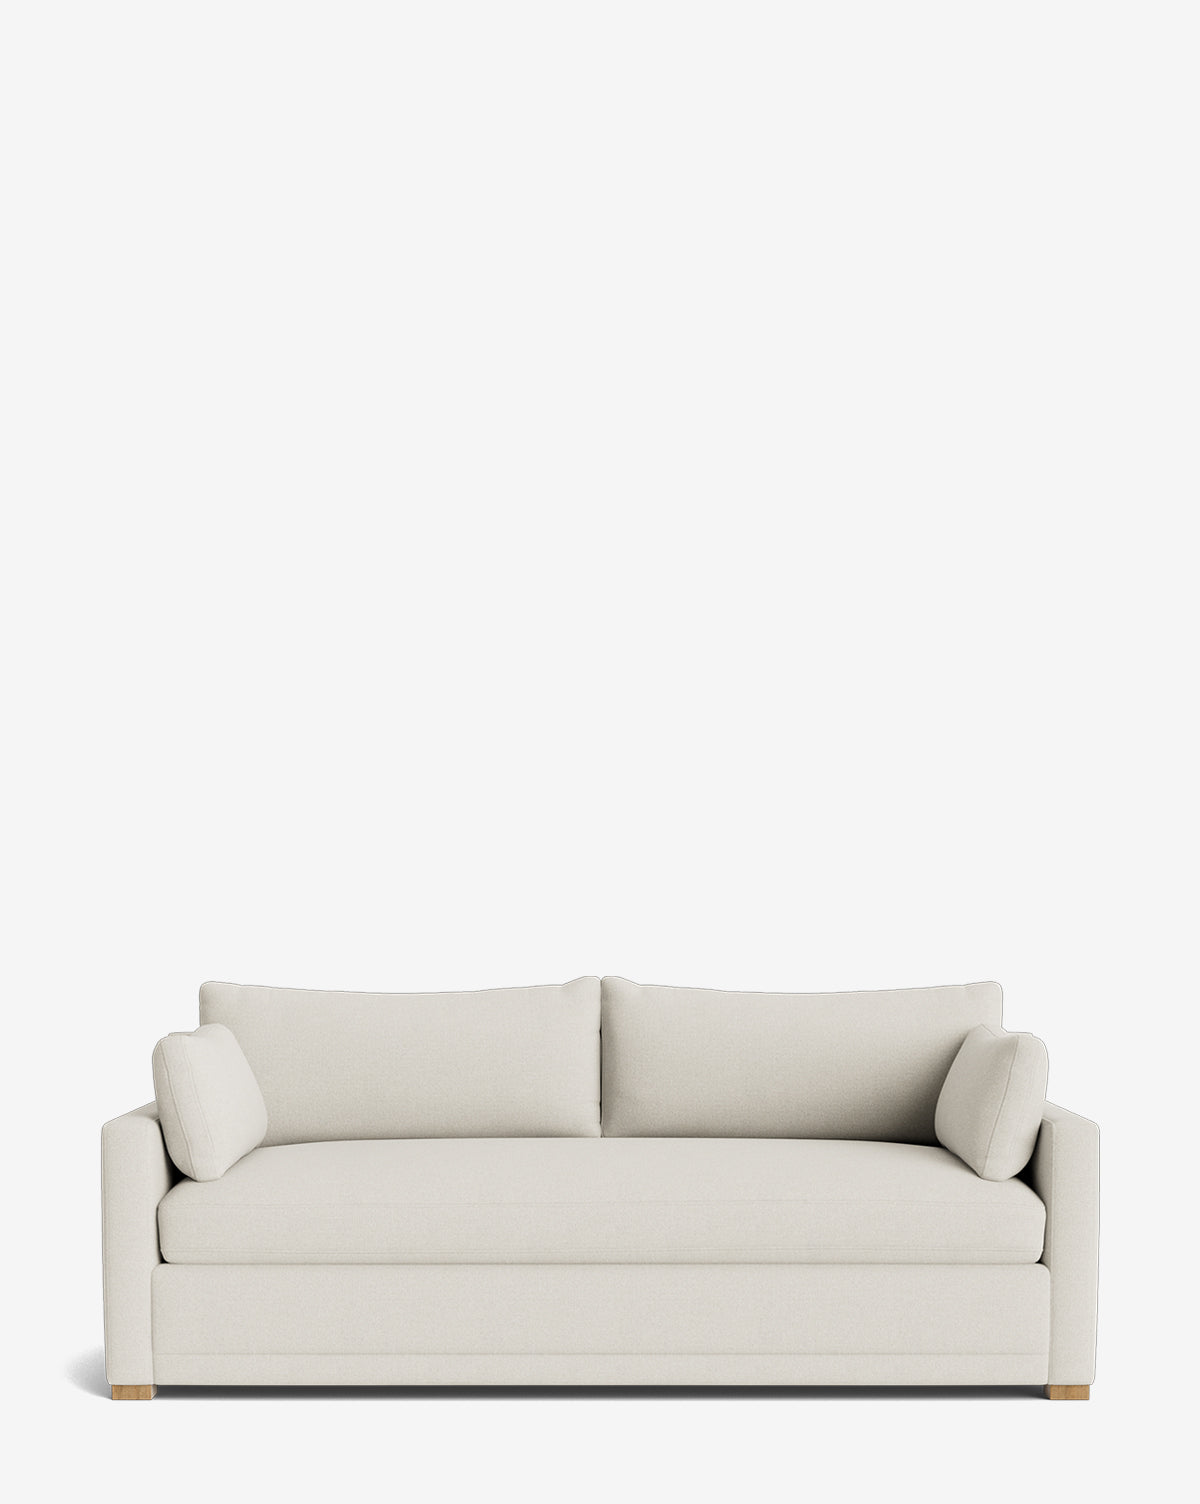 Rowe Fine Furniture, Peterson Upholstered Sofa